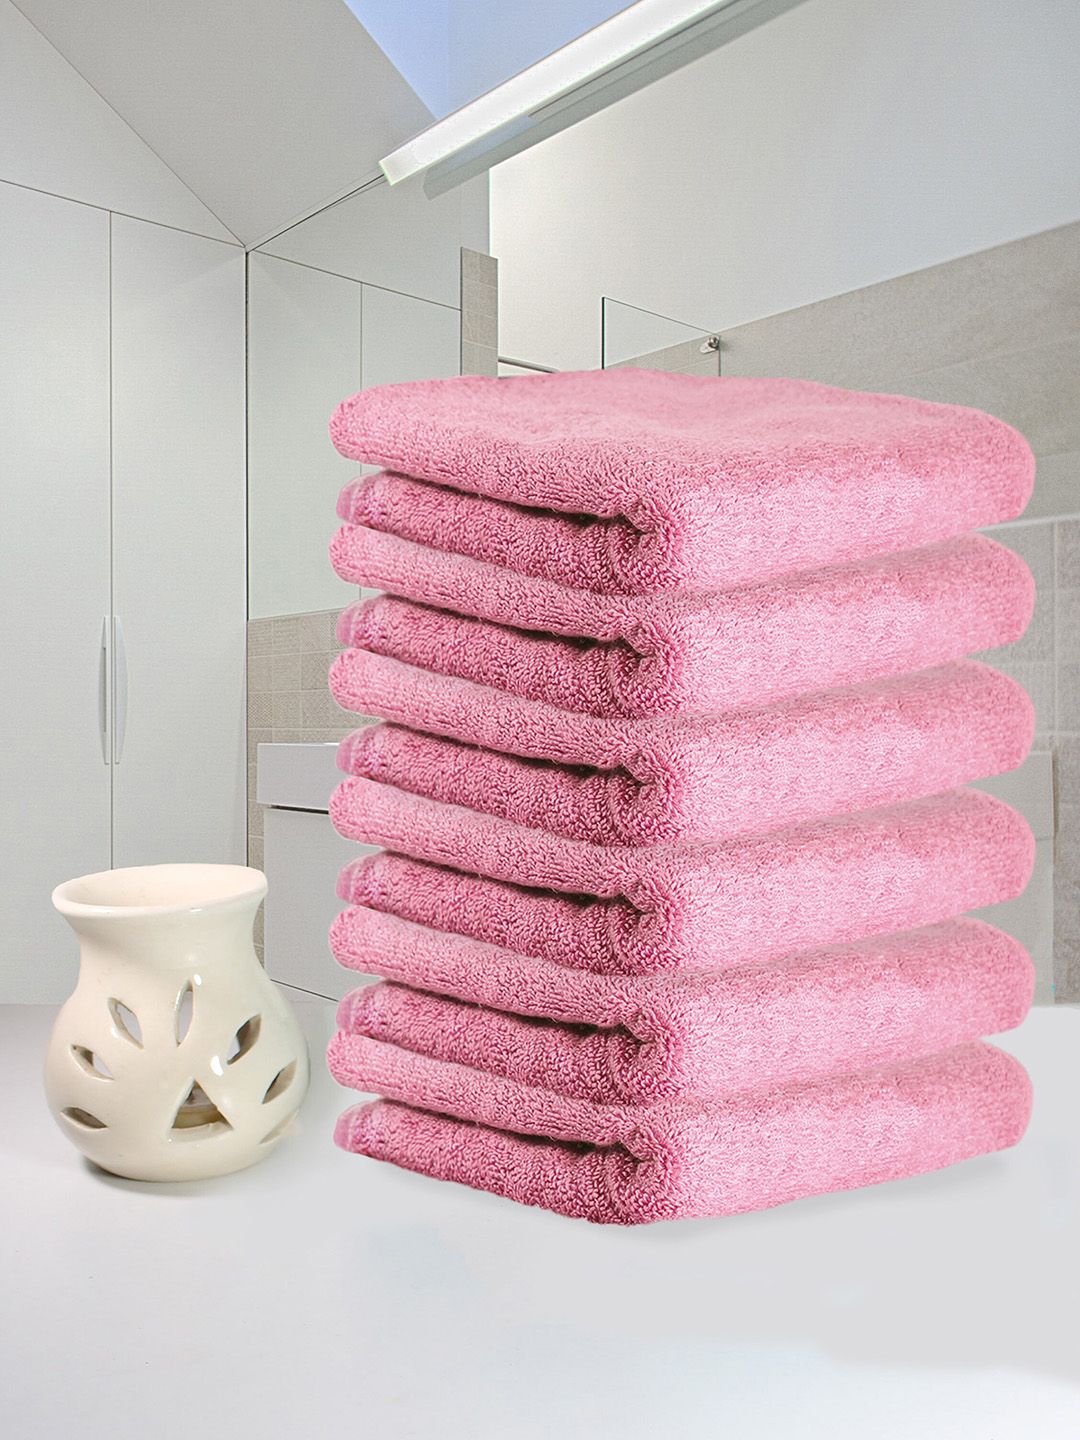 Heelium Set Of 6 Peach-Colored Solid 600 GSM Bamboo Hand Towels Price in India